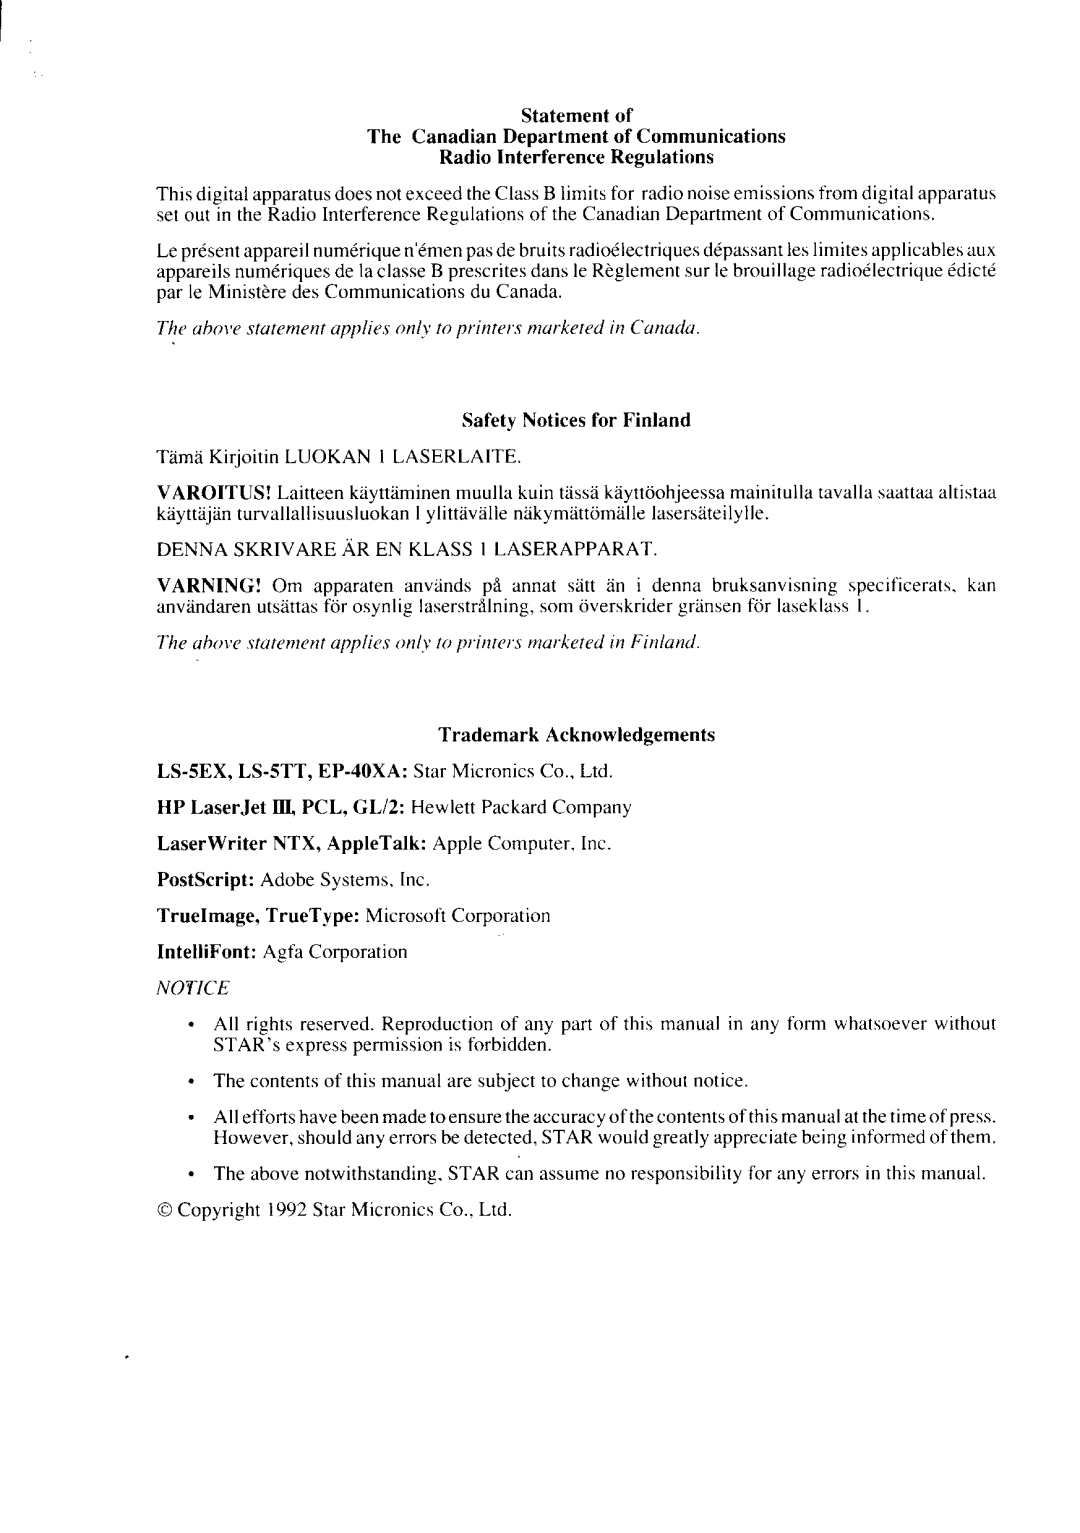 Star Micronics LS-5 TT, LS-5 EX Statement of The Canadian Department of Communications, Radio Interference Regulations 